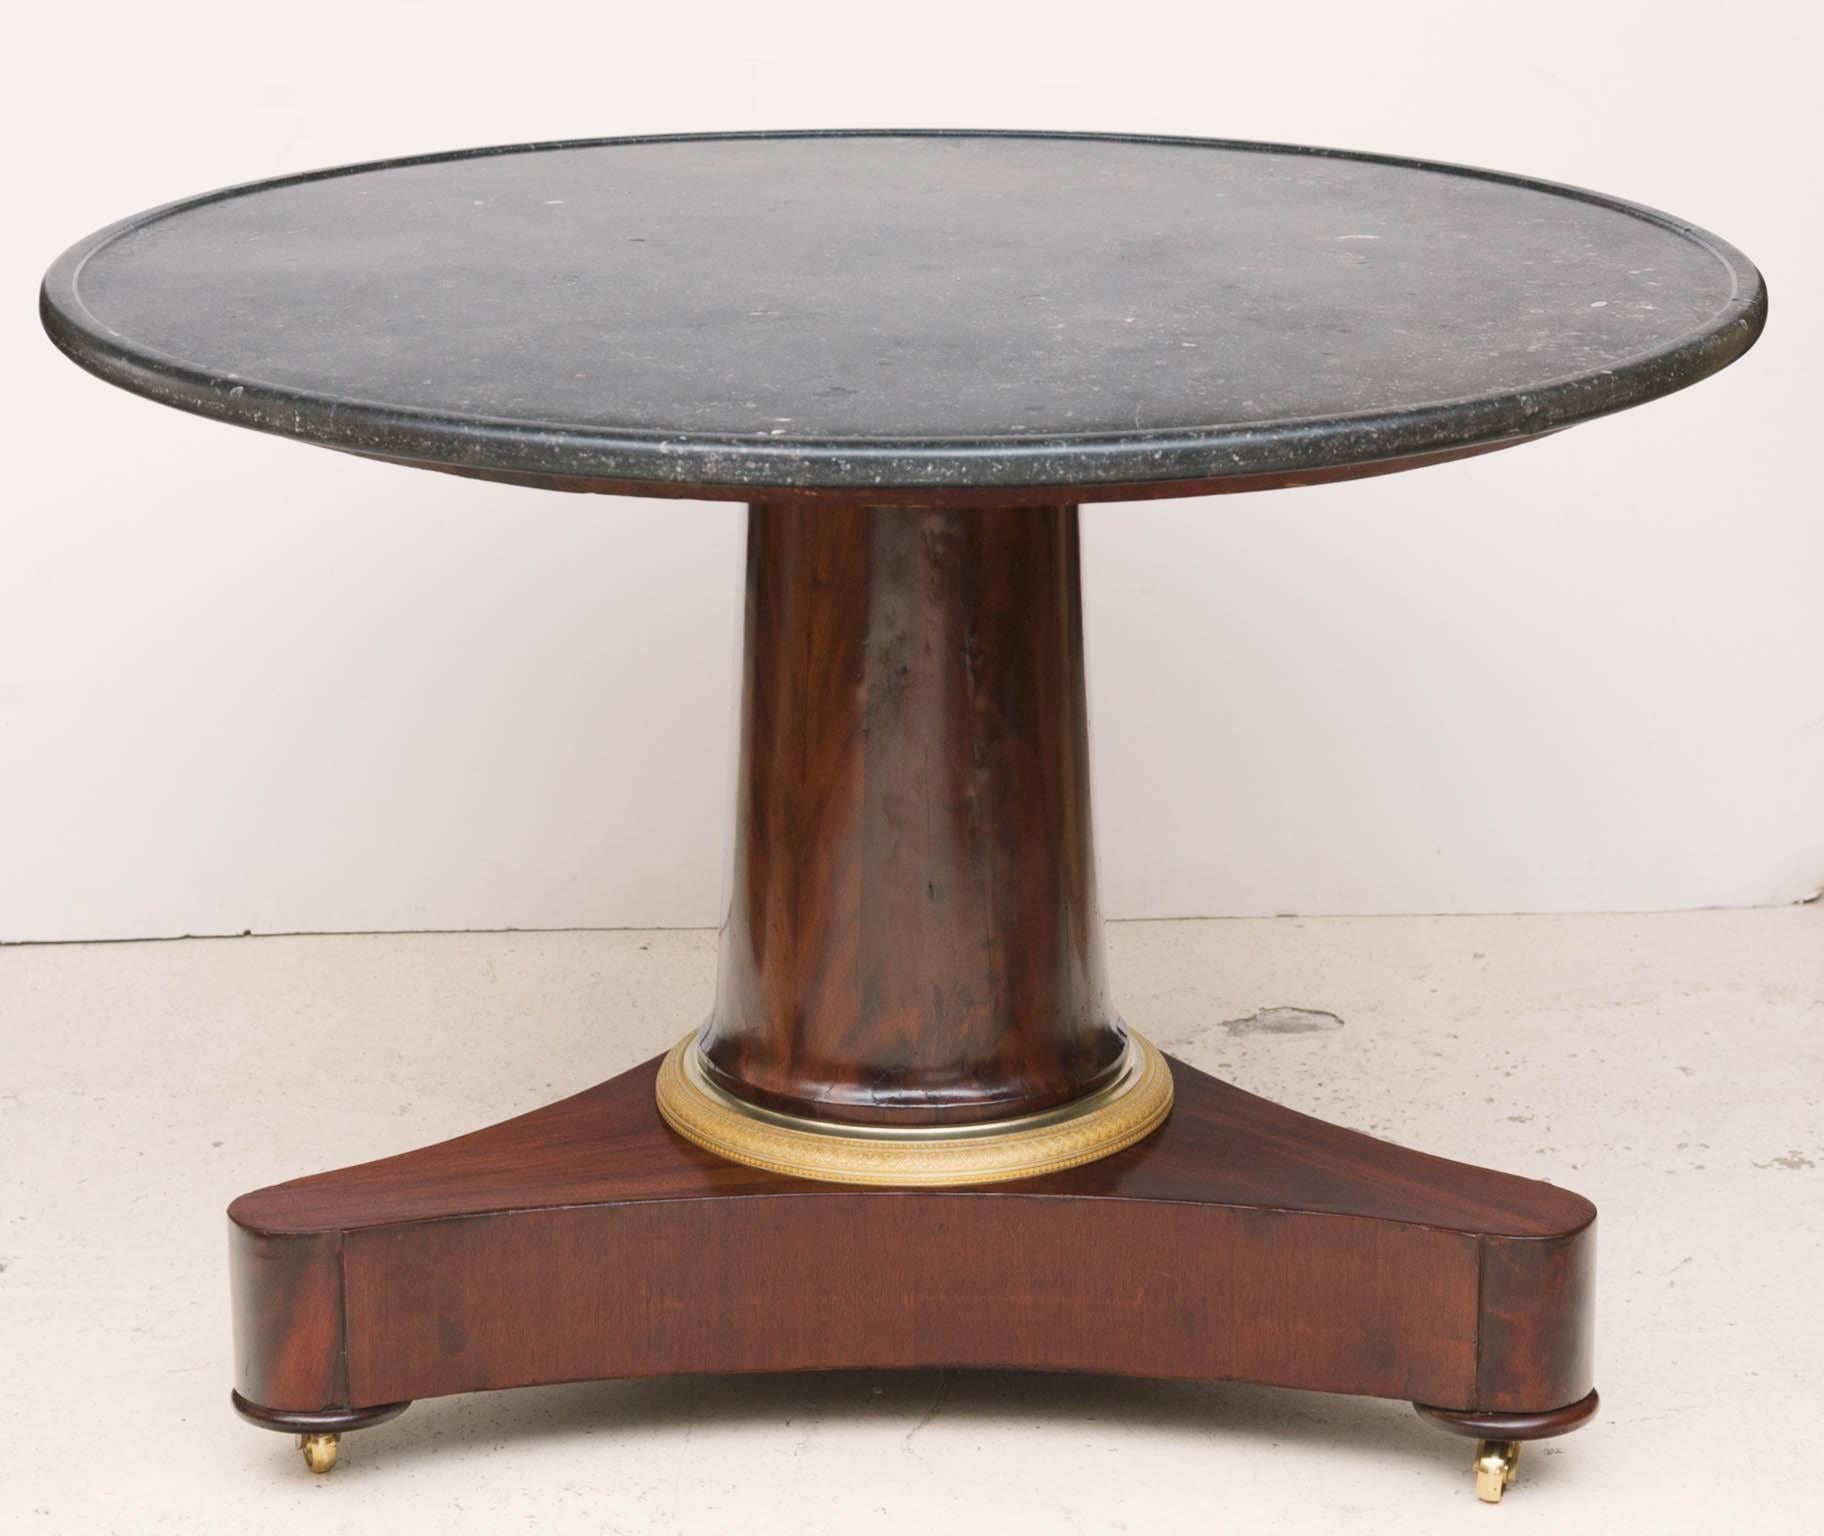 With Belgian black fossil marble top. Central flame mahogany column with gilt bronze ring on tripod base.
Replacement brass castors. Some old repairs to the veneer, see photographs.
France, circa 1810.